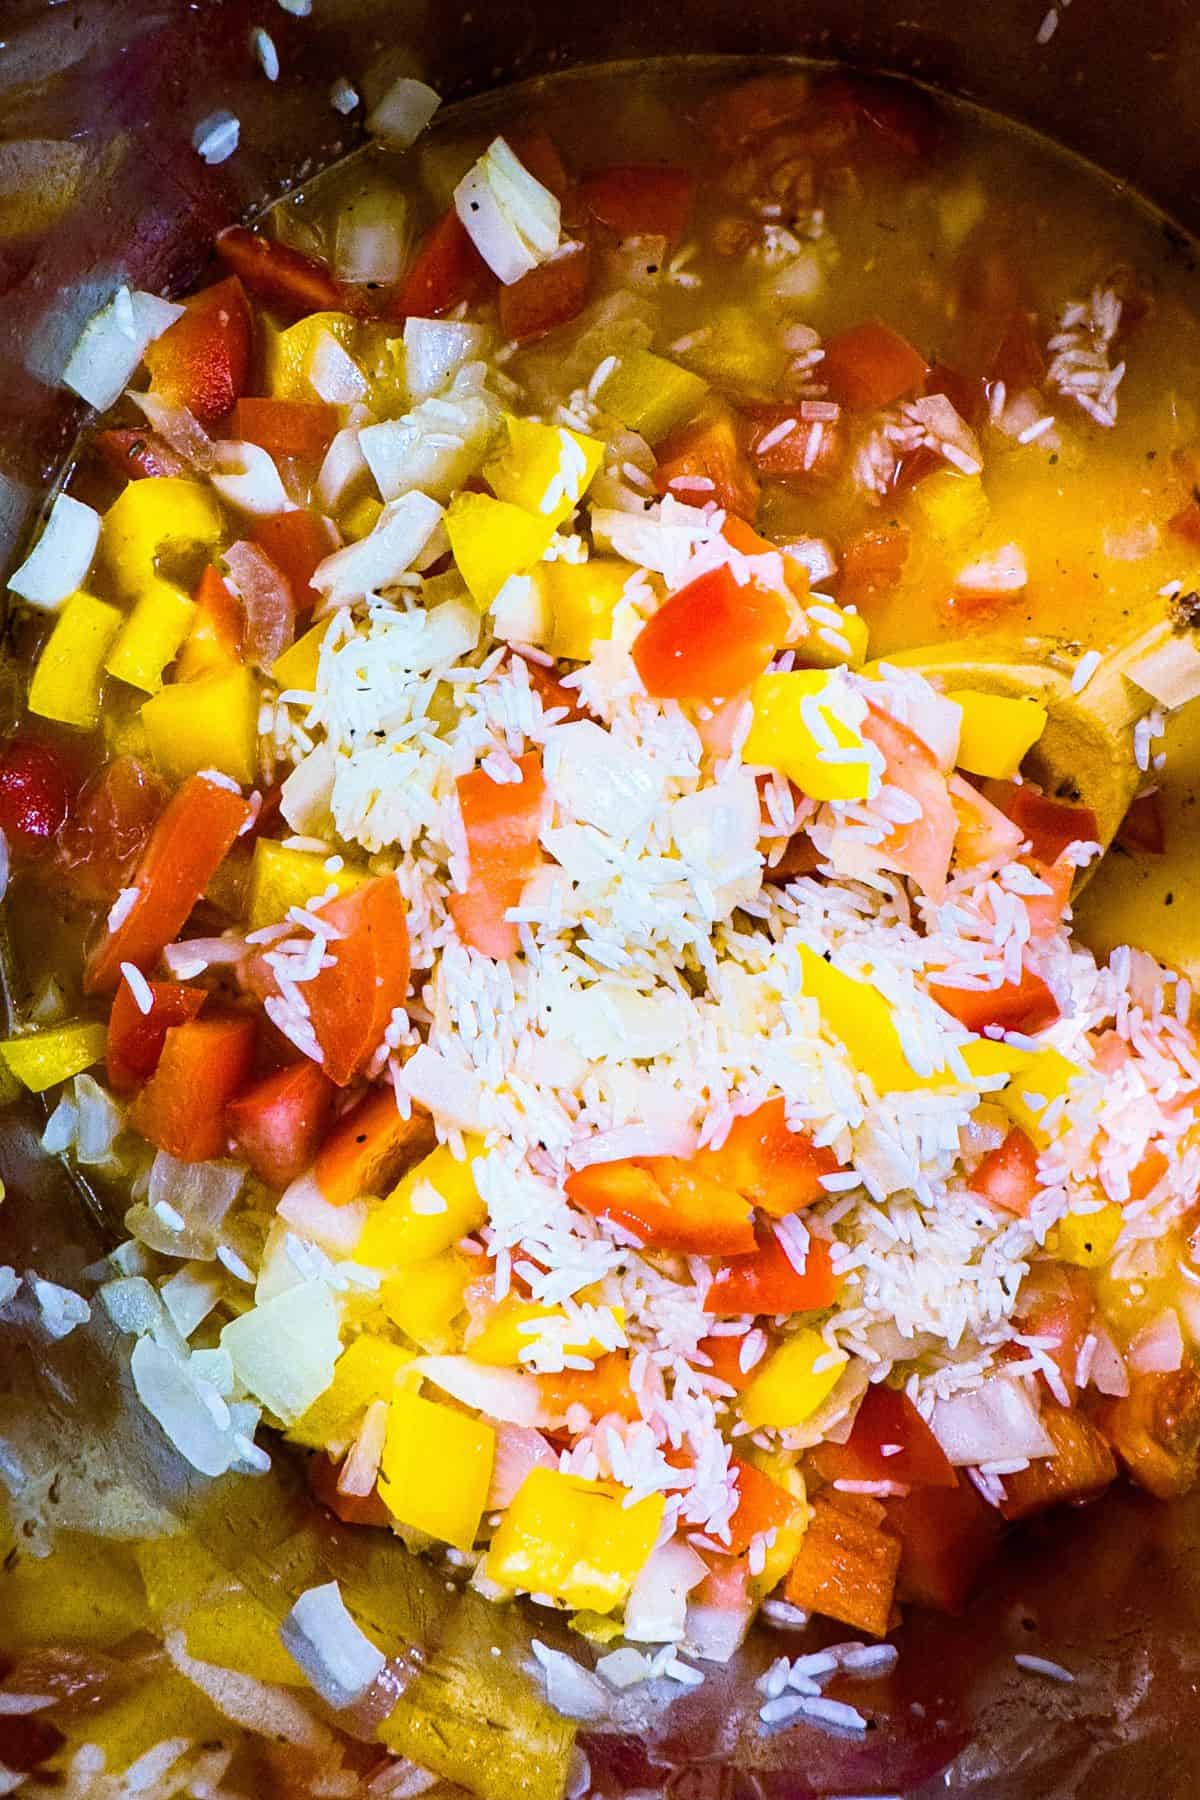 Overhead shot of an Instant Pot with uncooked rice, diced tomatoes, yellow and red bell peppers, and onions, ready to be cooked.